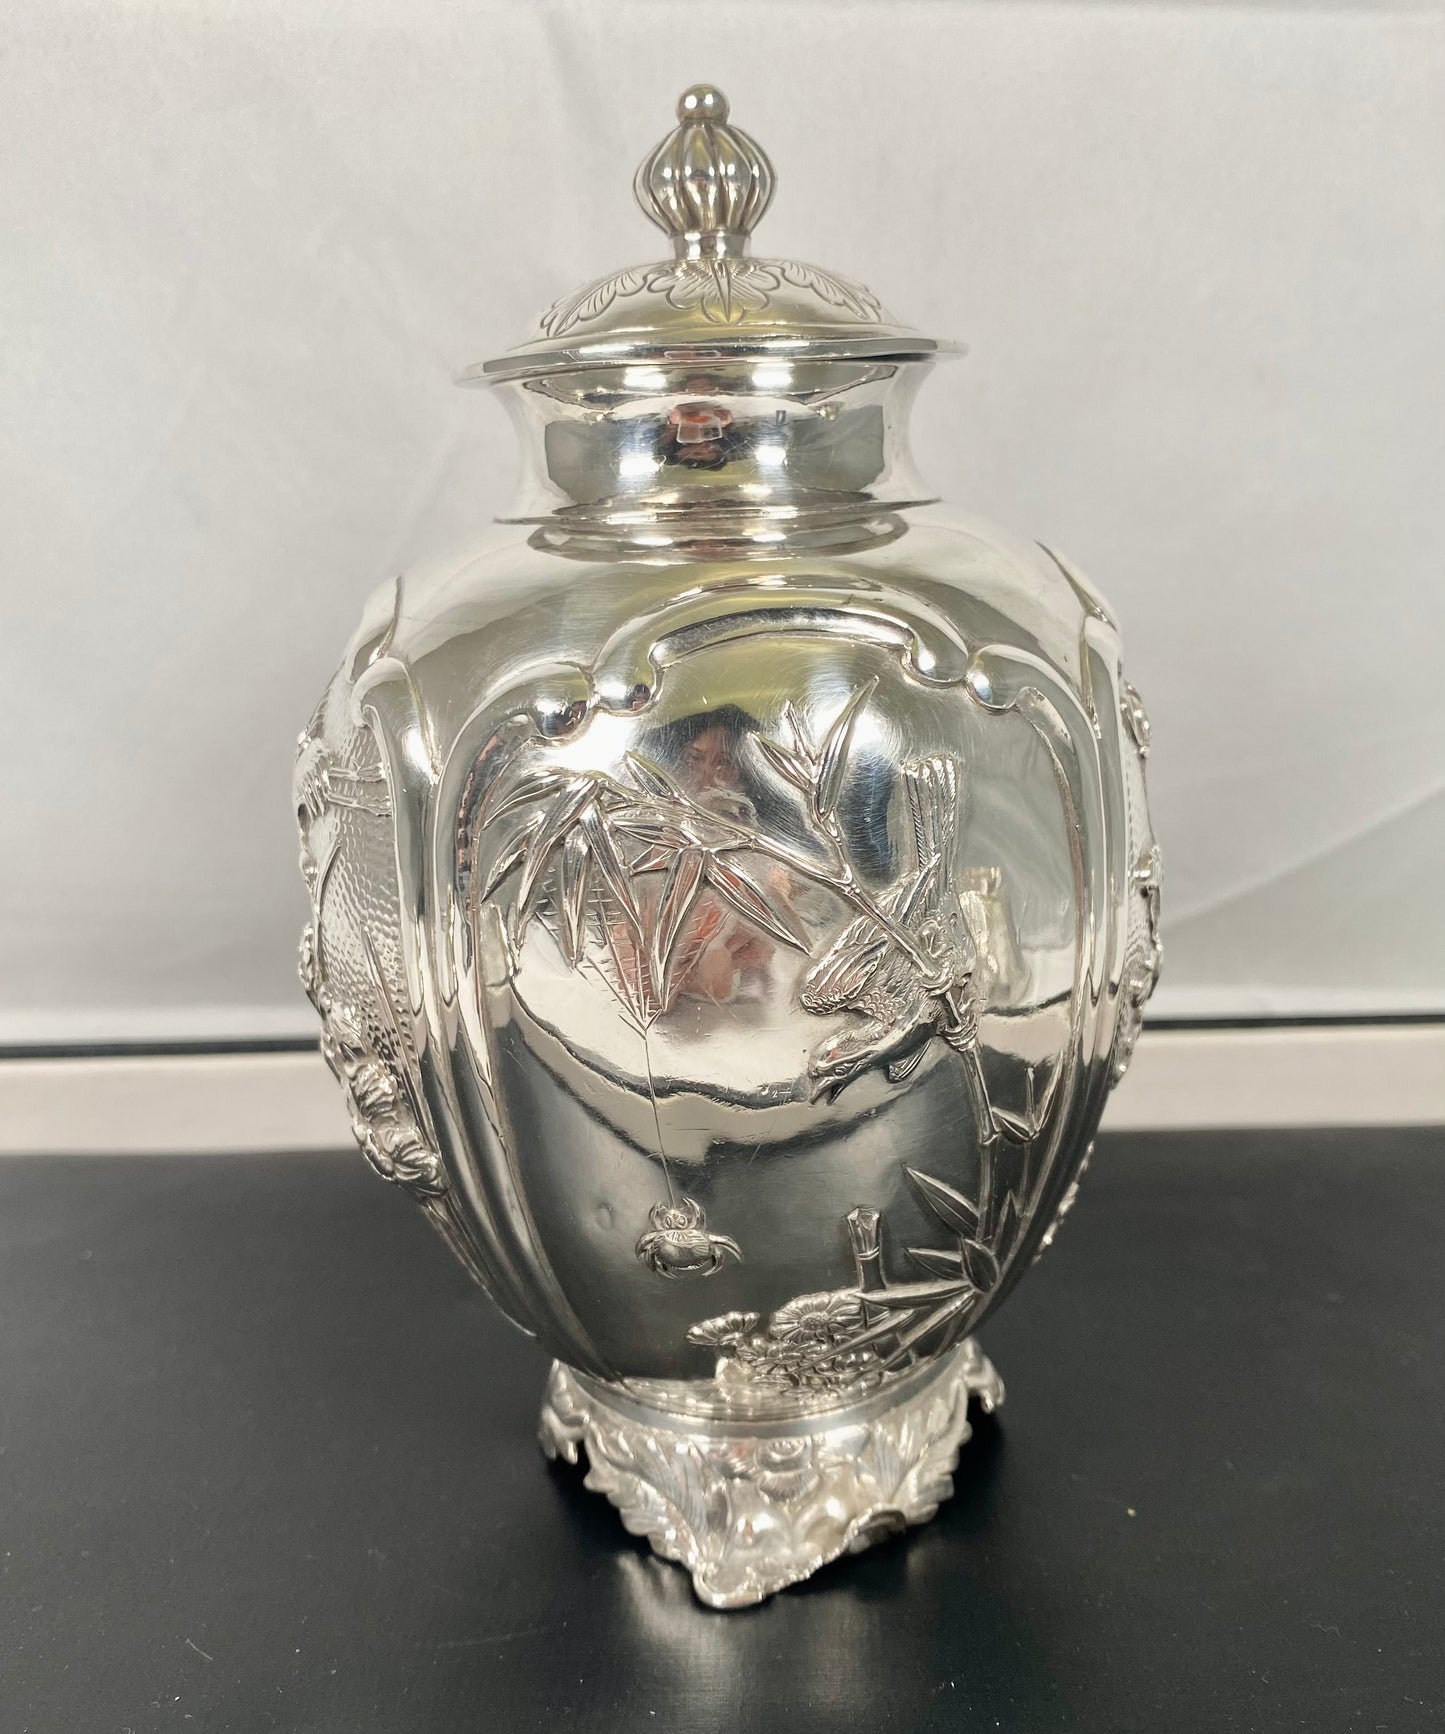 Antique Chinese export silver ginger jar, late 19th to early 20th century